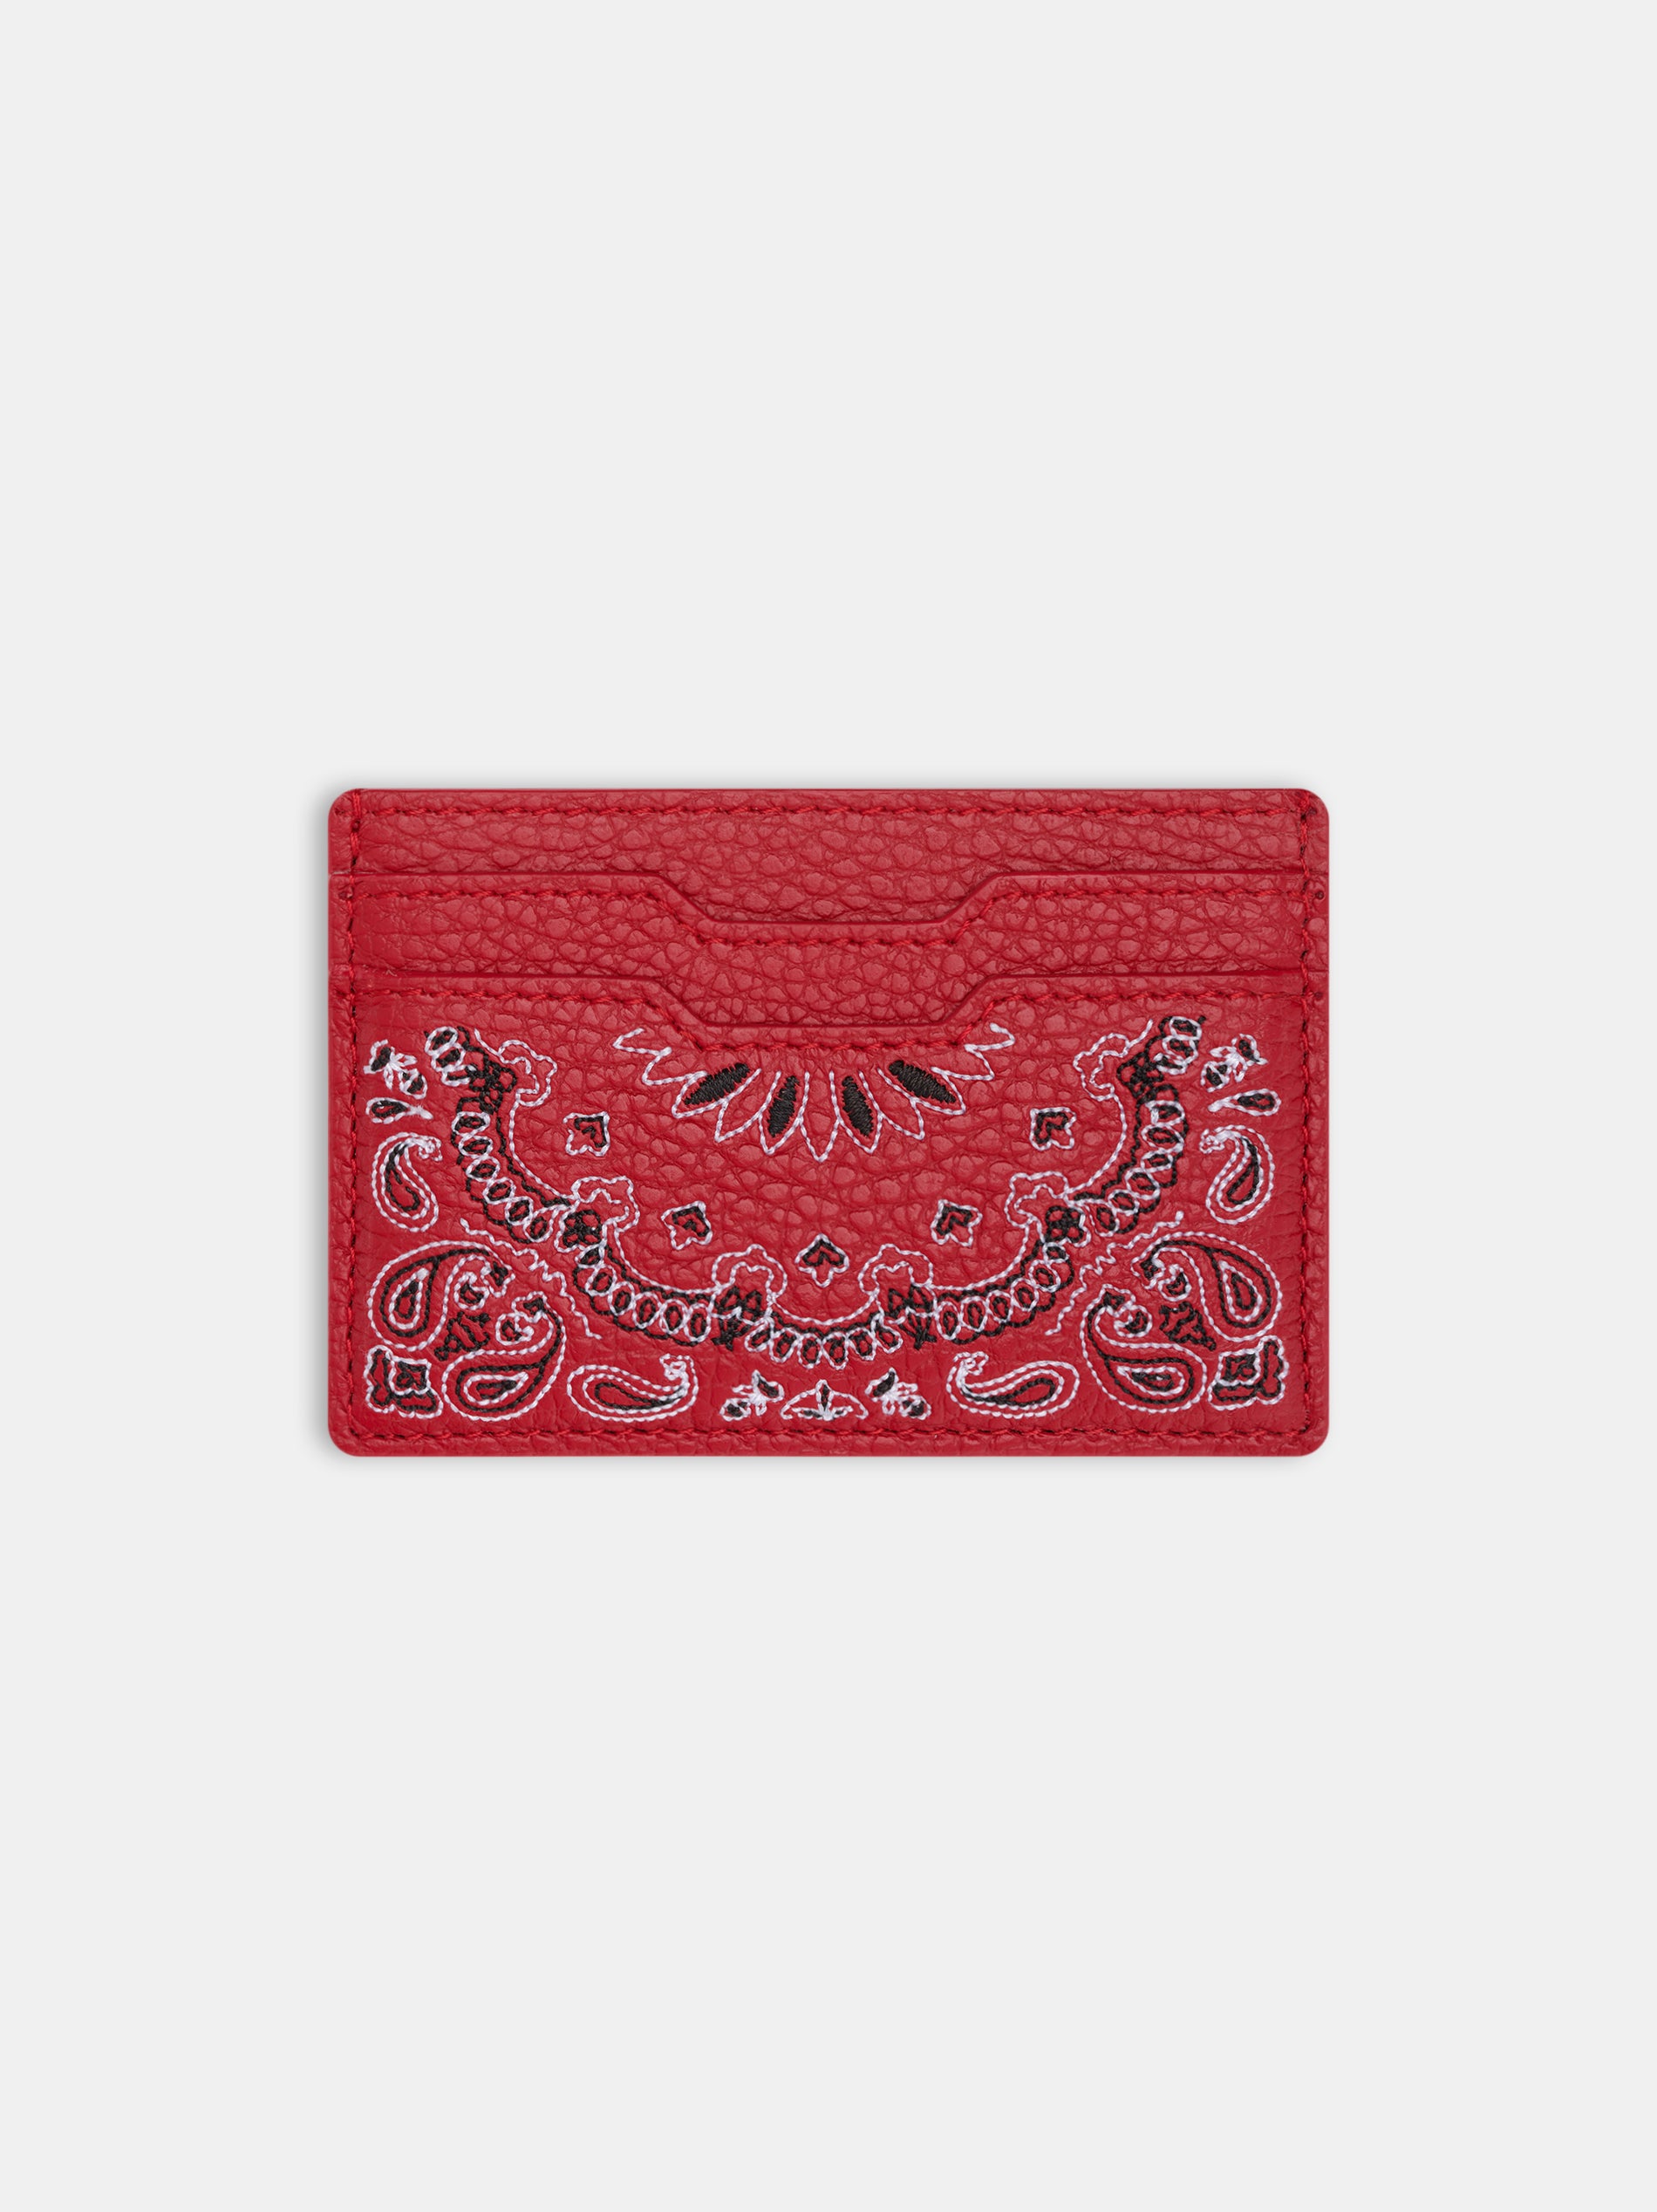 Product BANDANA CARD HOLDER - Red featured image